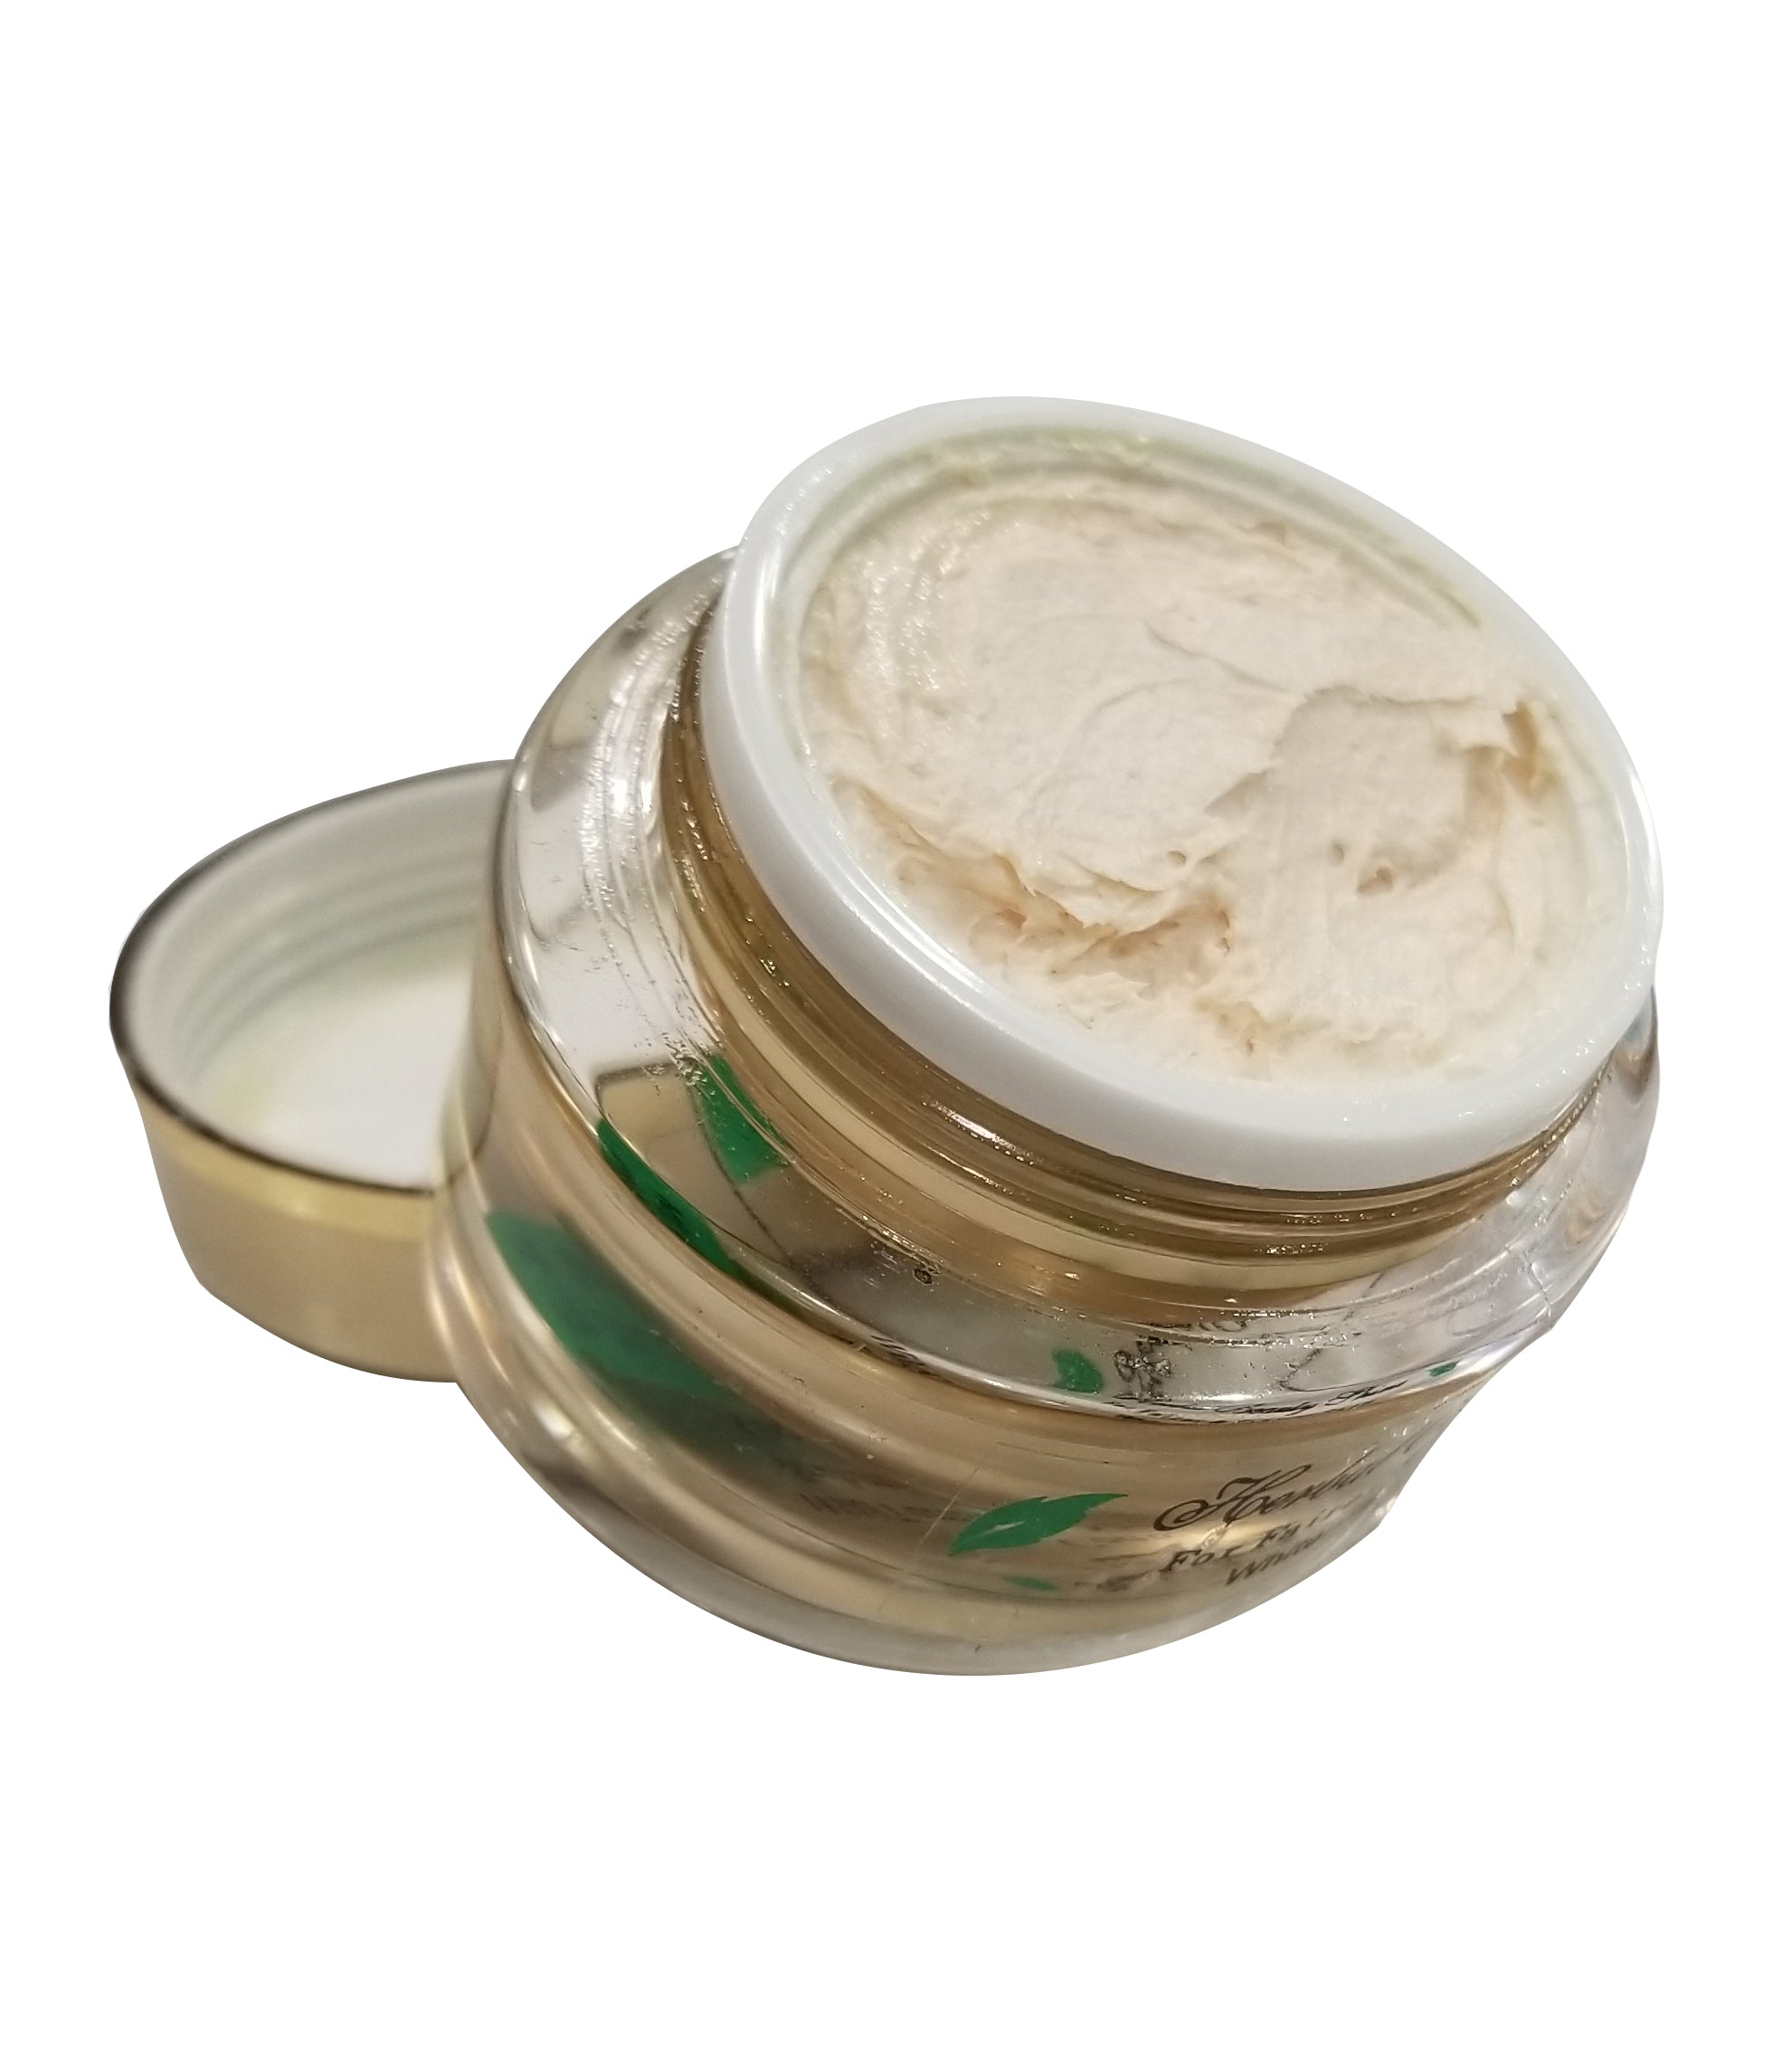 Herbal Beauty Shine Skin Care Products